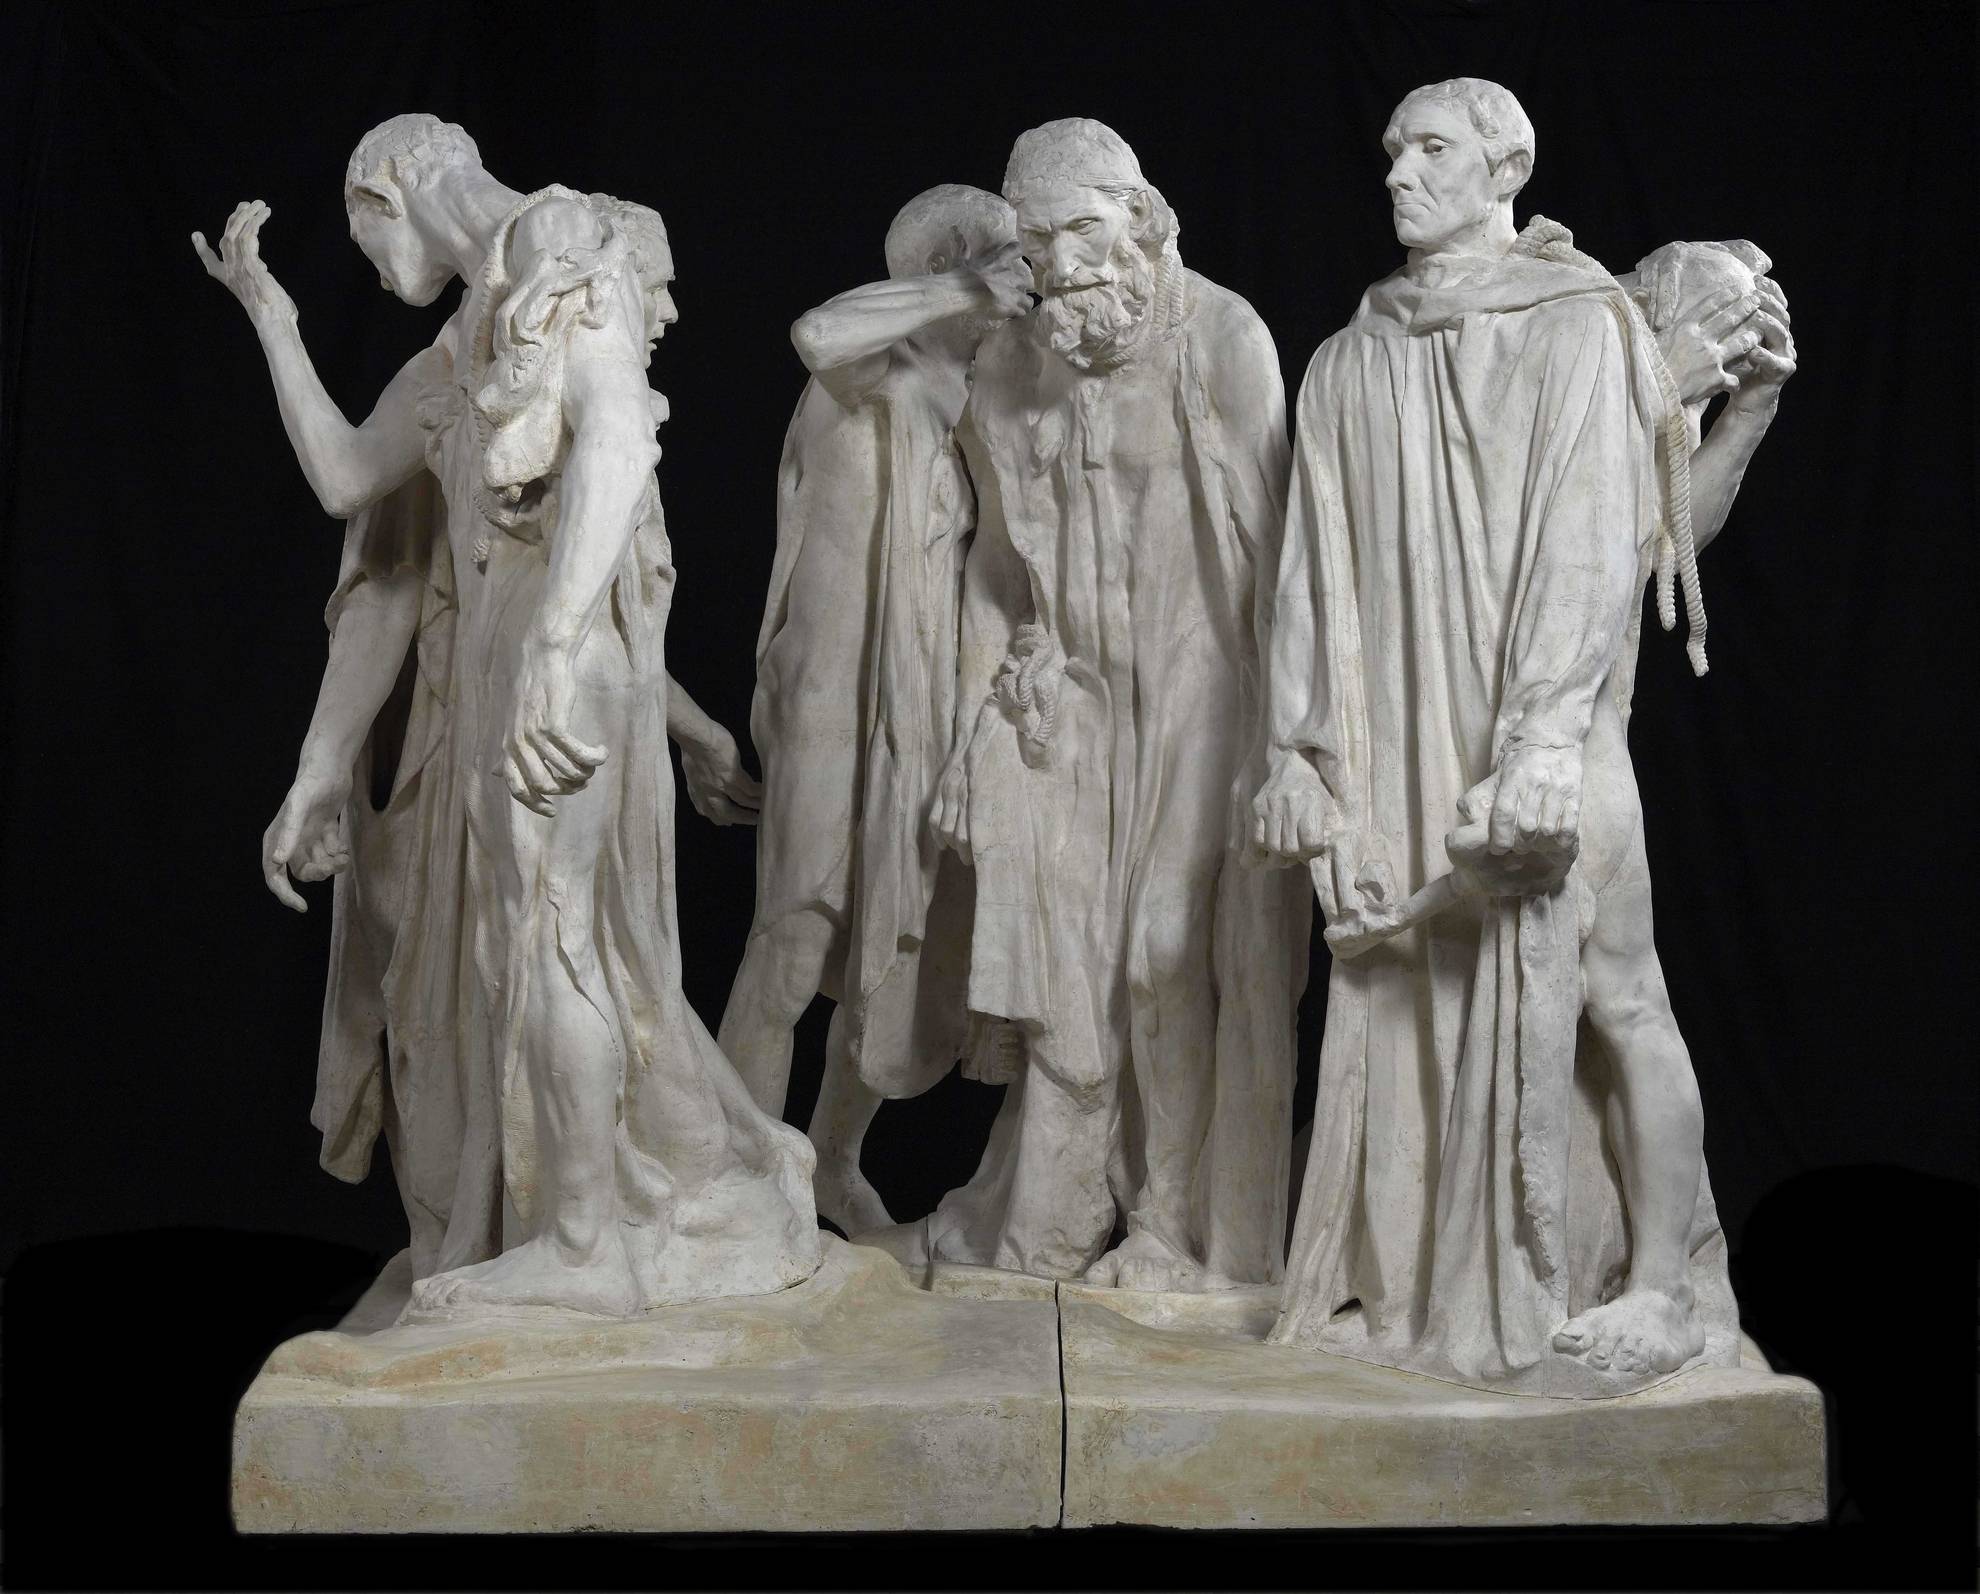 sculpture of a group of academic men in long robes, The Burghers of Calais